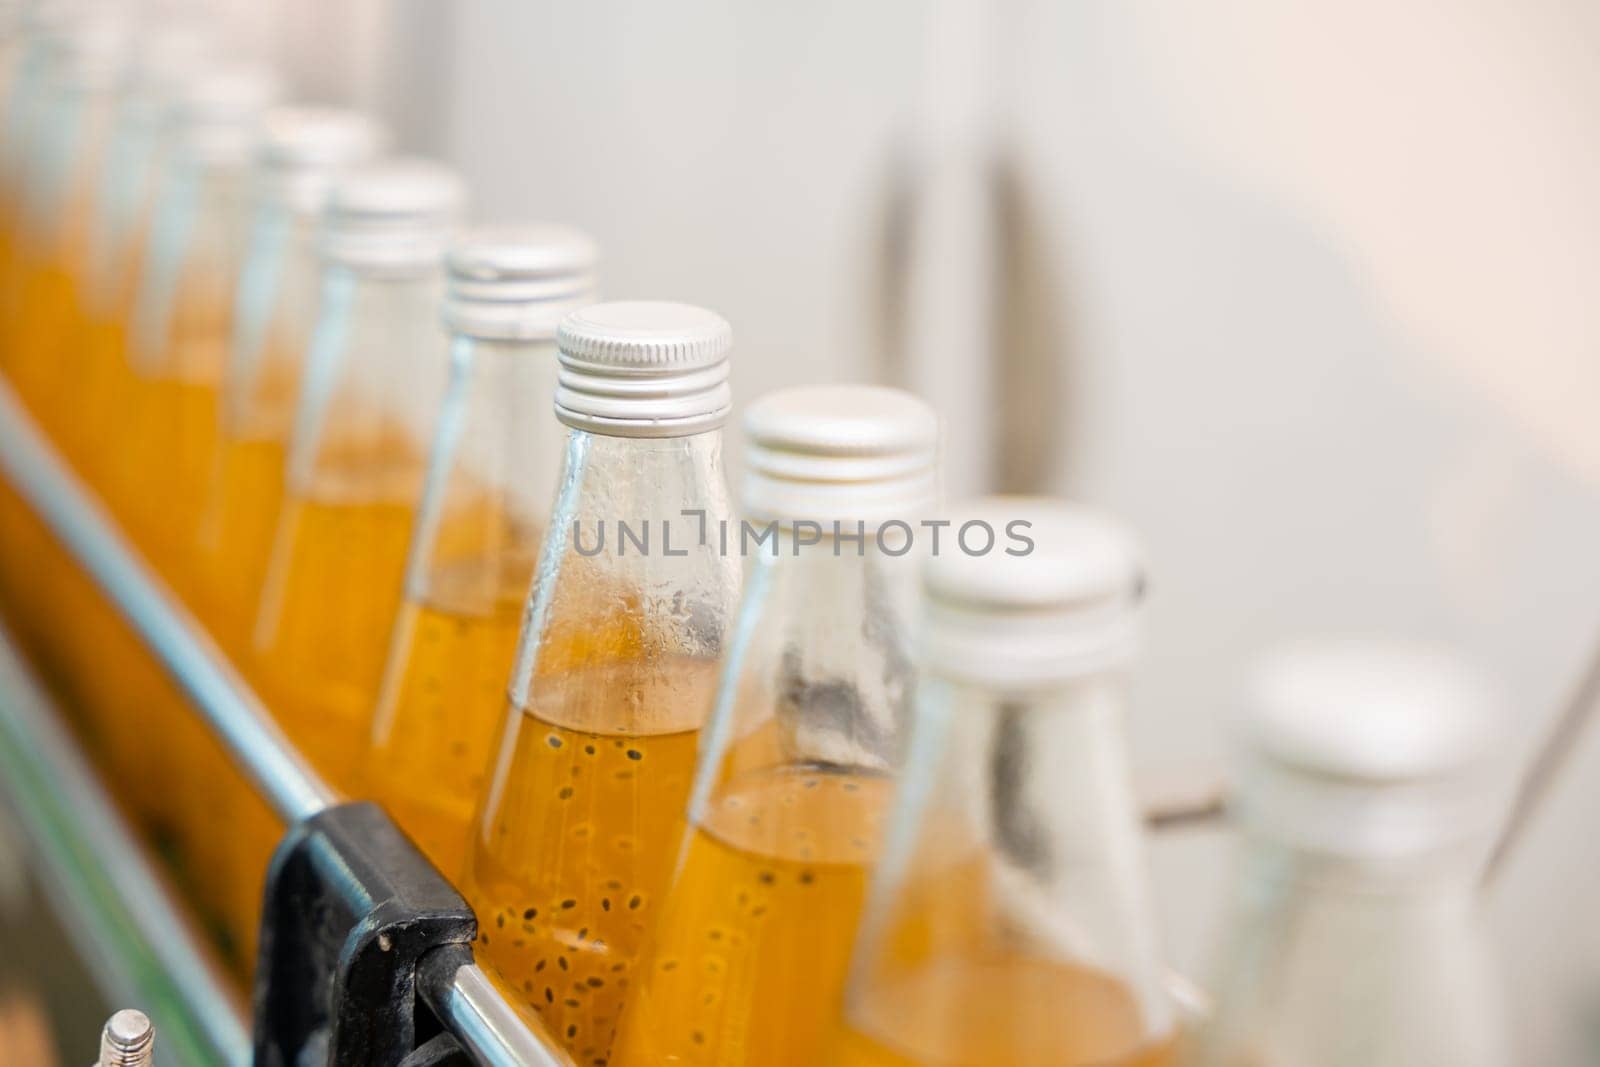 Factory's clean automated process fills transparent bottles with organic basil or chia seed drinks mixed with pomegranate. High-quality manufacturing is evident in the outcome.